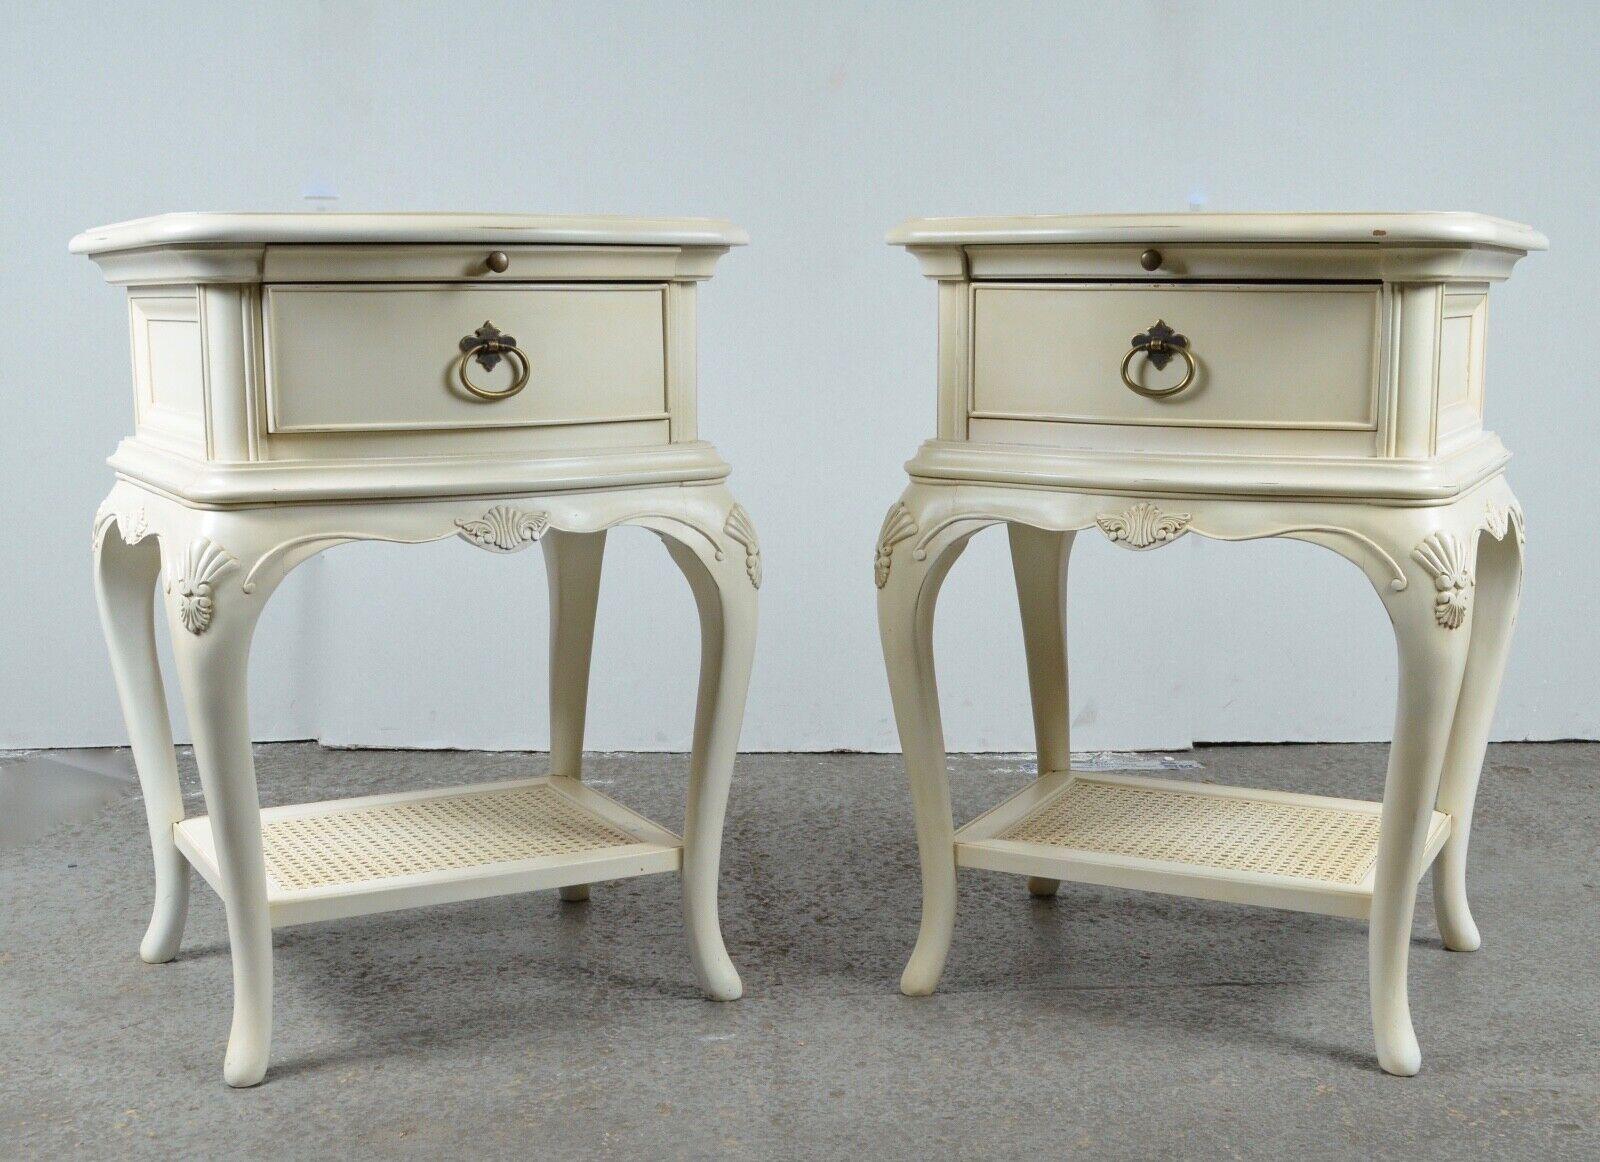 We are delighted to offer for sale this lovely pair of Willis & Gambier Ivory bedside cabinets, nightstand tables. 

The Willis & Gambier Ivory bedroom collection is crafted from solid 
Birch and Birch veneers combined with a unique, hand